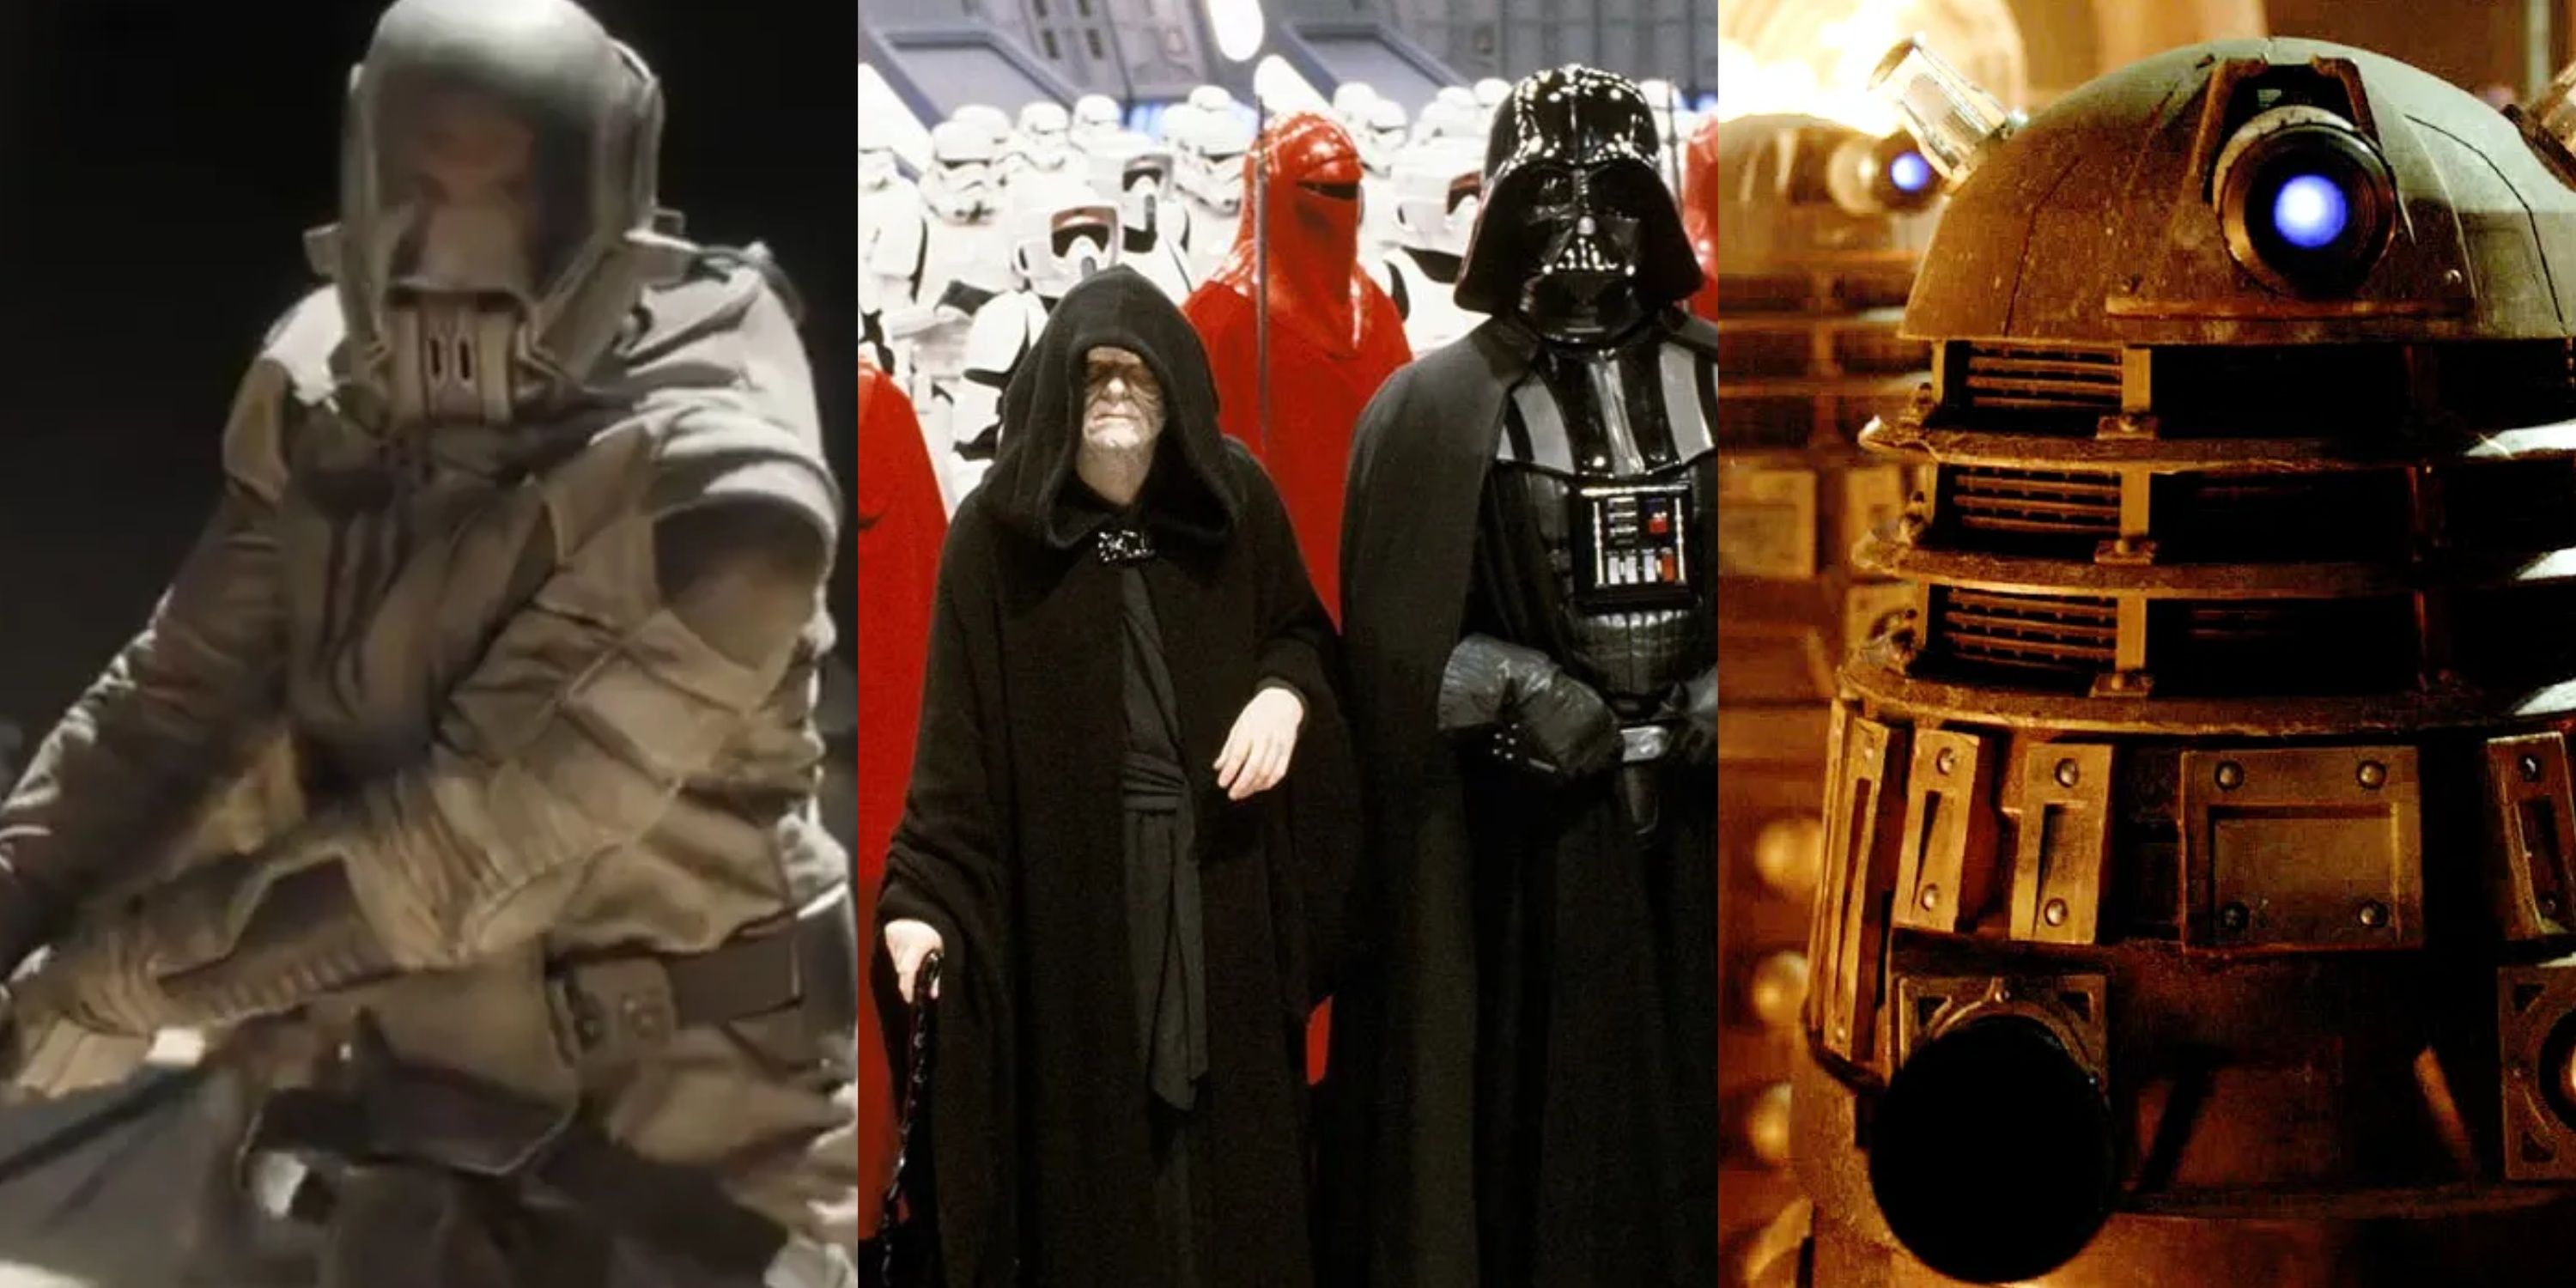 Split image Sardaukar from Dune, Emperor and Darth Vader army, Daleks from Doctor Who